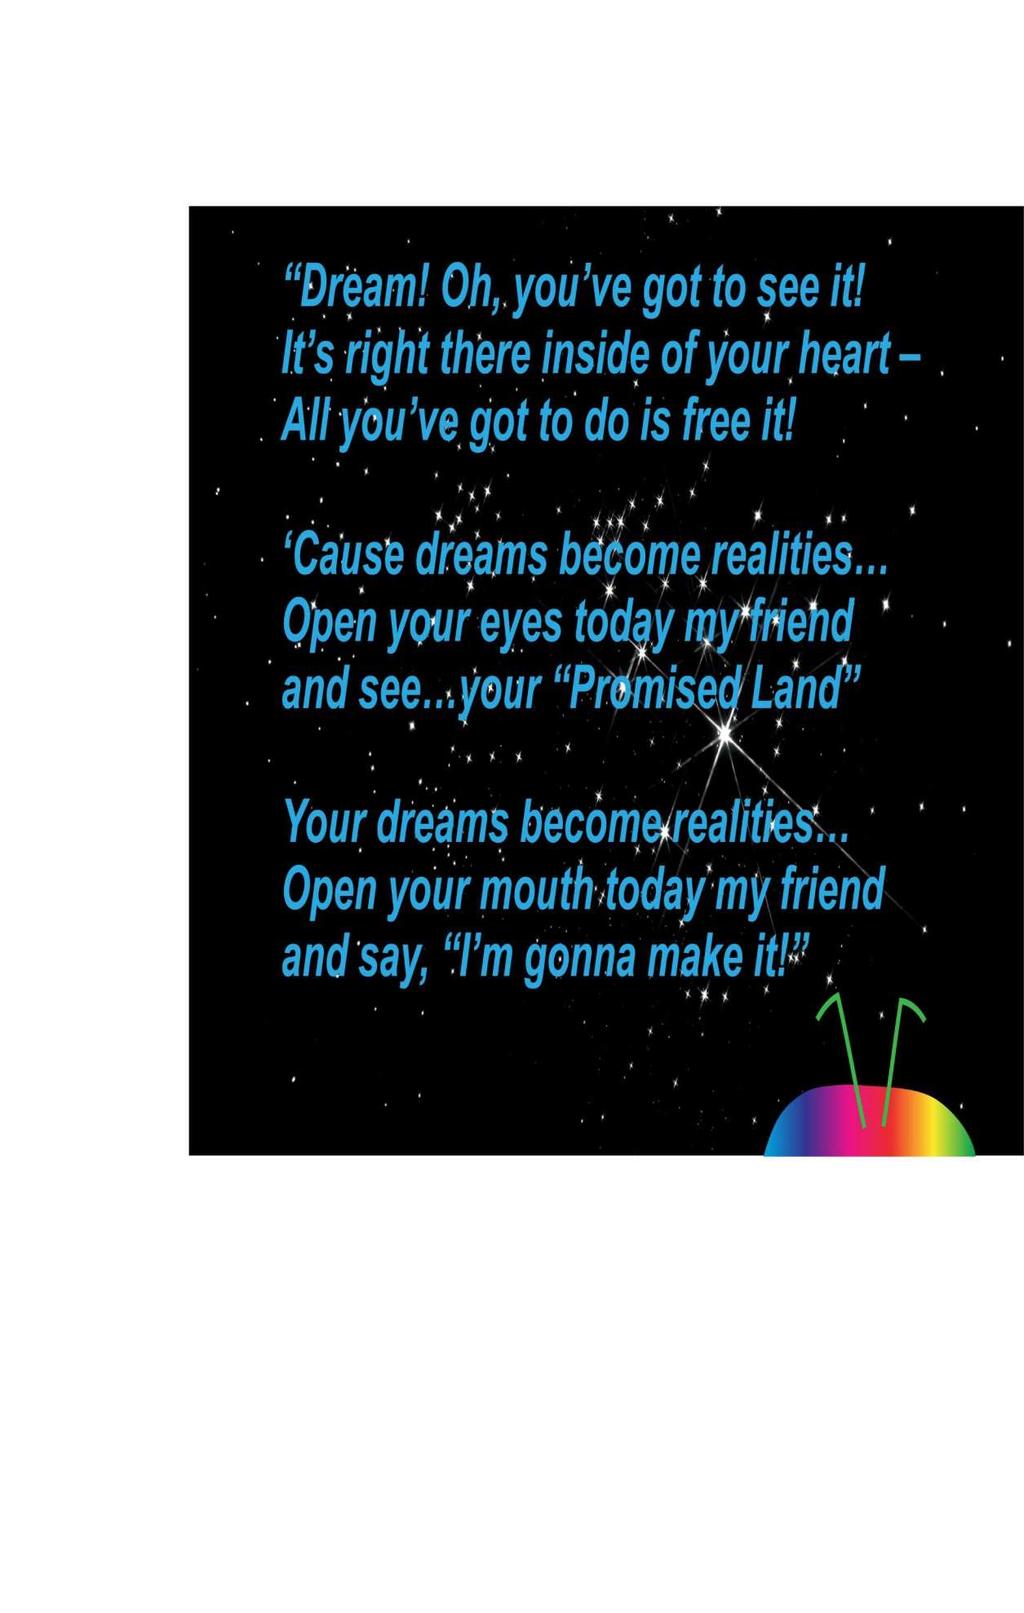 Dream! Oh, you ve got to see it! It s right there inside of your heart All you ve got to do is free it!